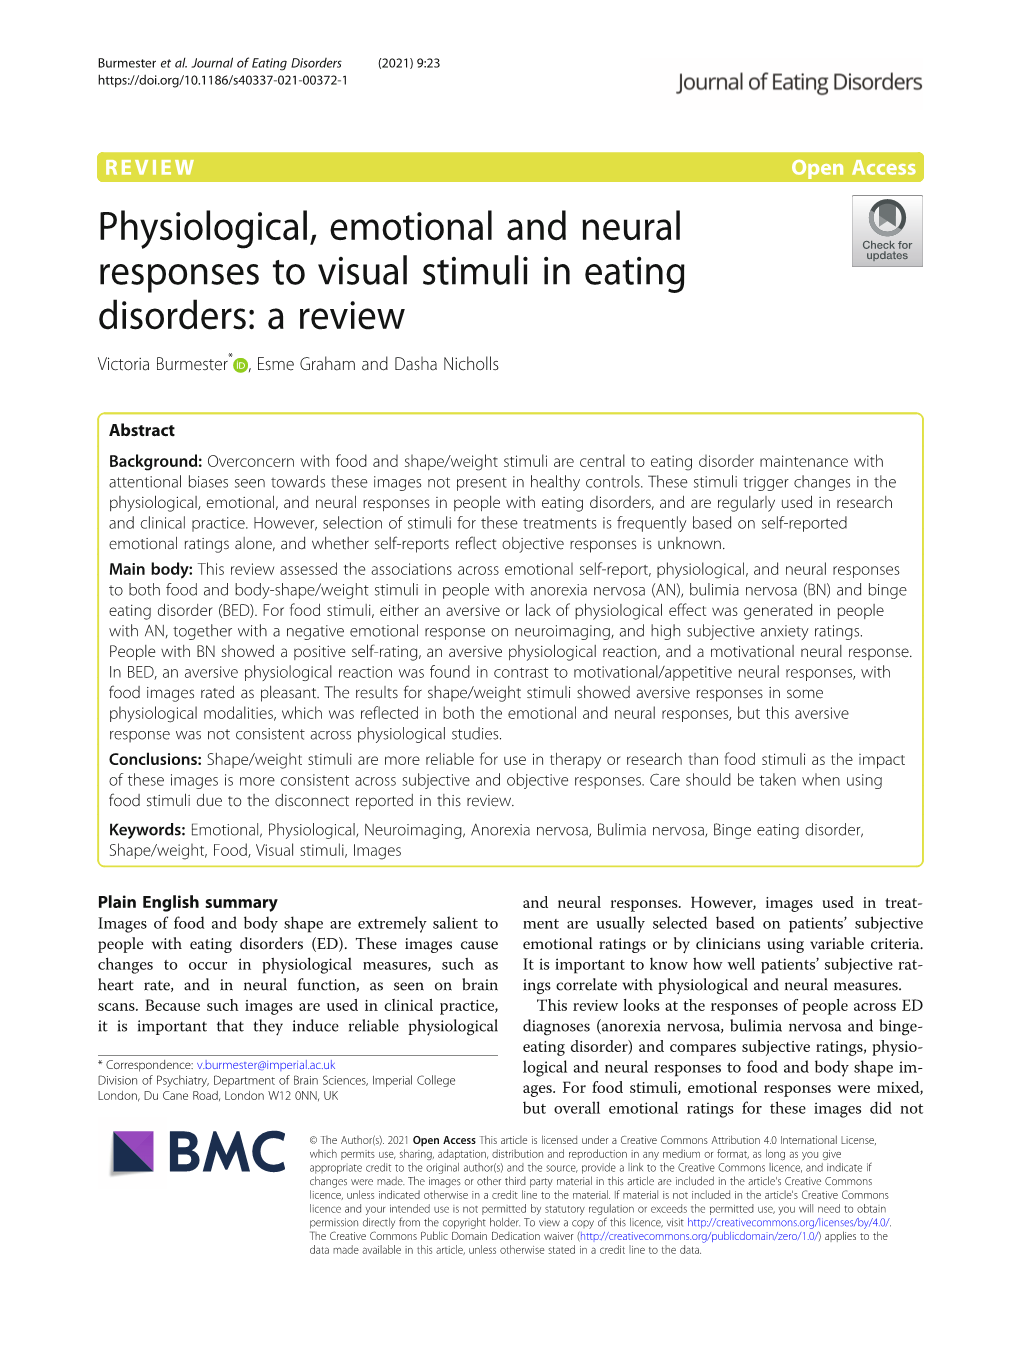 Physiological, Emotional and Neural Responses to Visual Stimuli in Eating Disorders: a Review Victoria Burmester* , Esme Graham and Dasha Nicholls